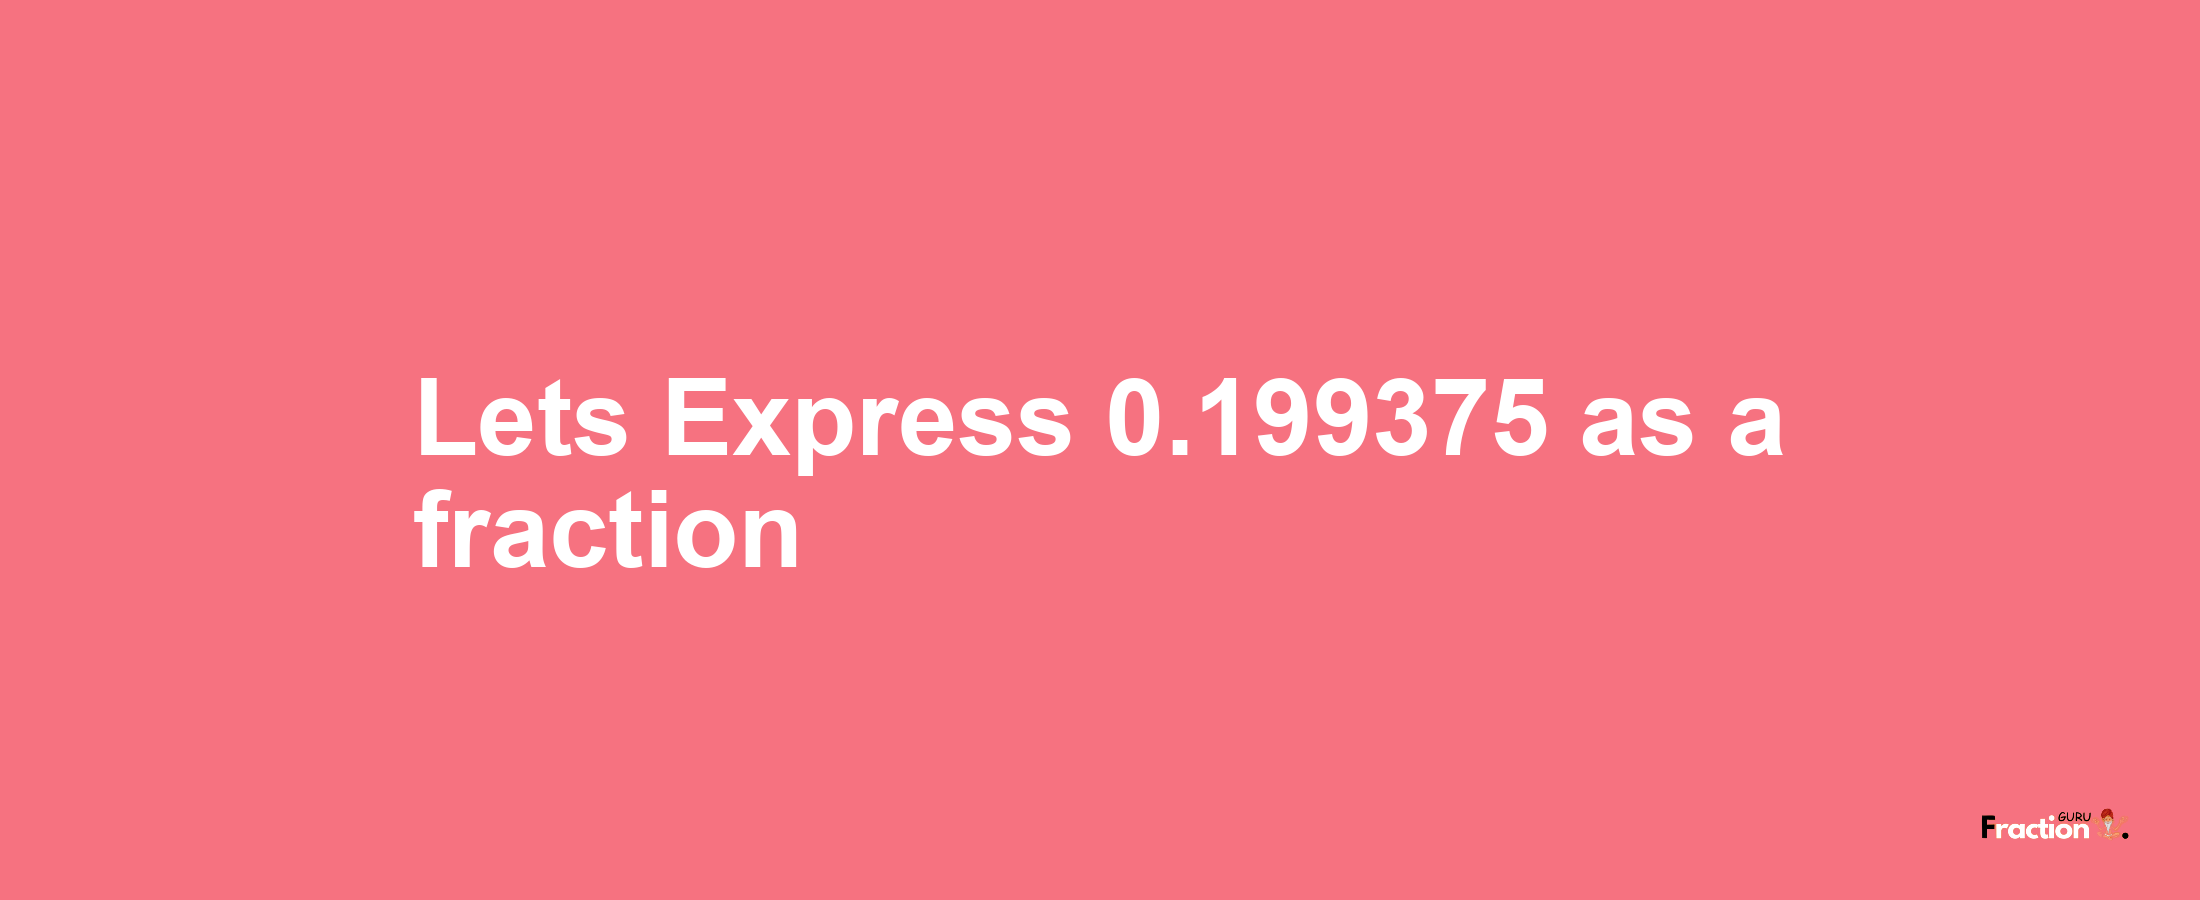 Lets Express 0.199375 as afraction